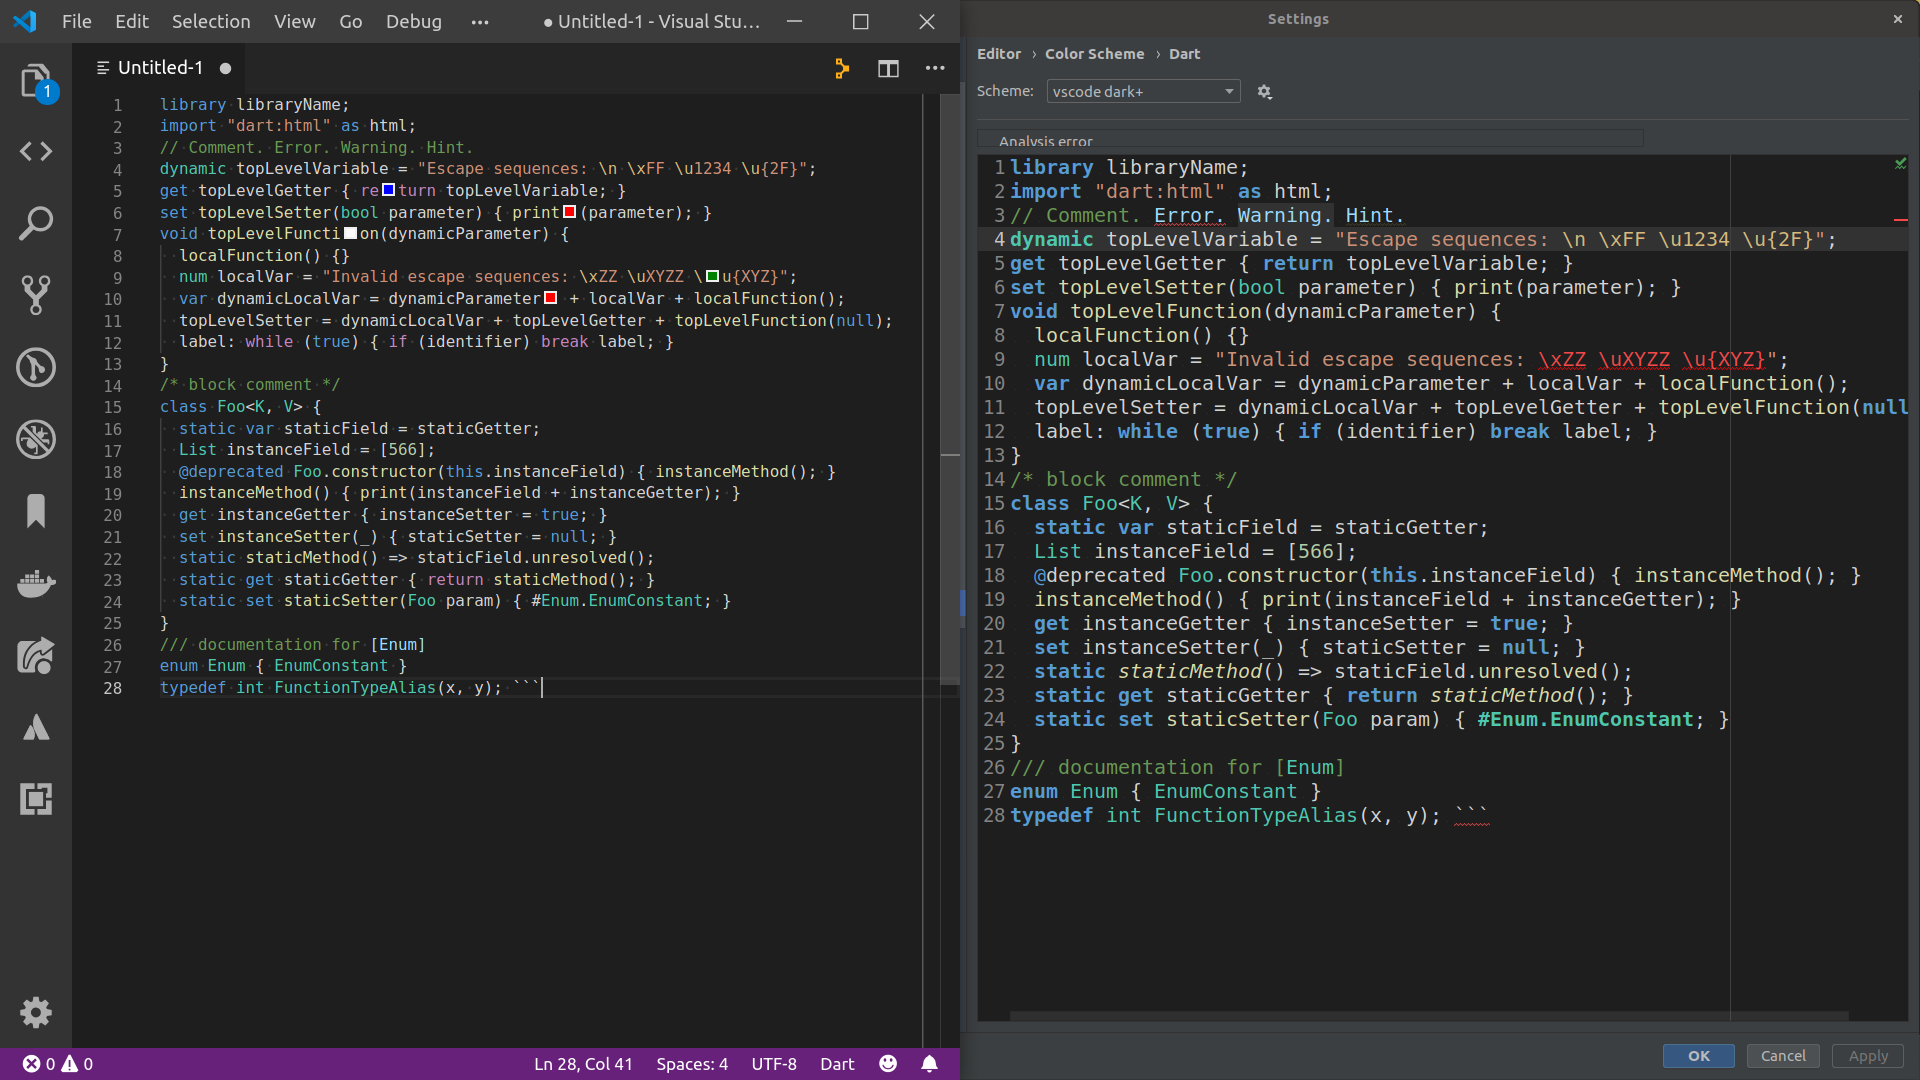 all webstorm themes are grey